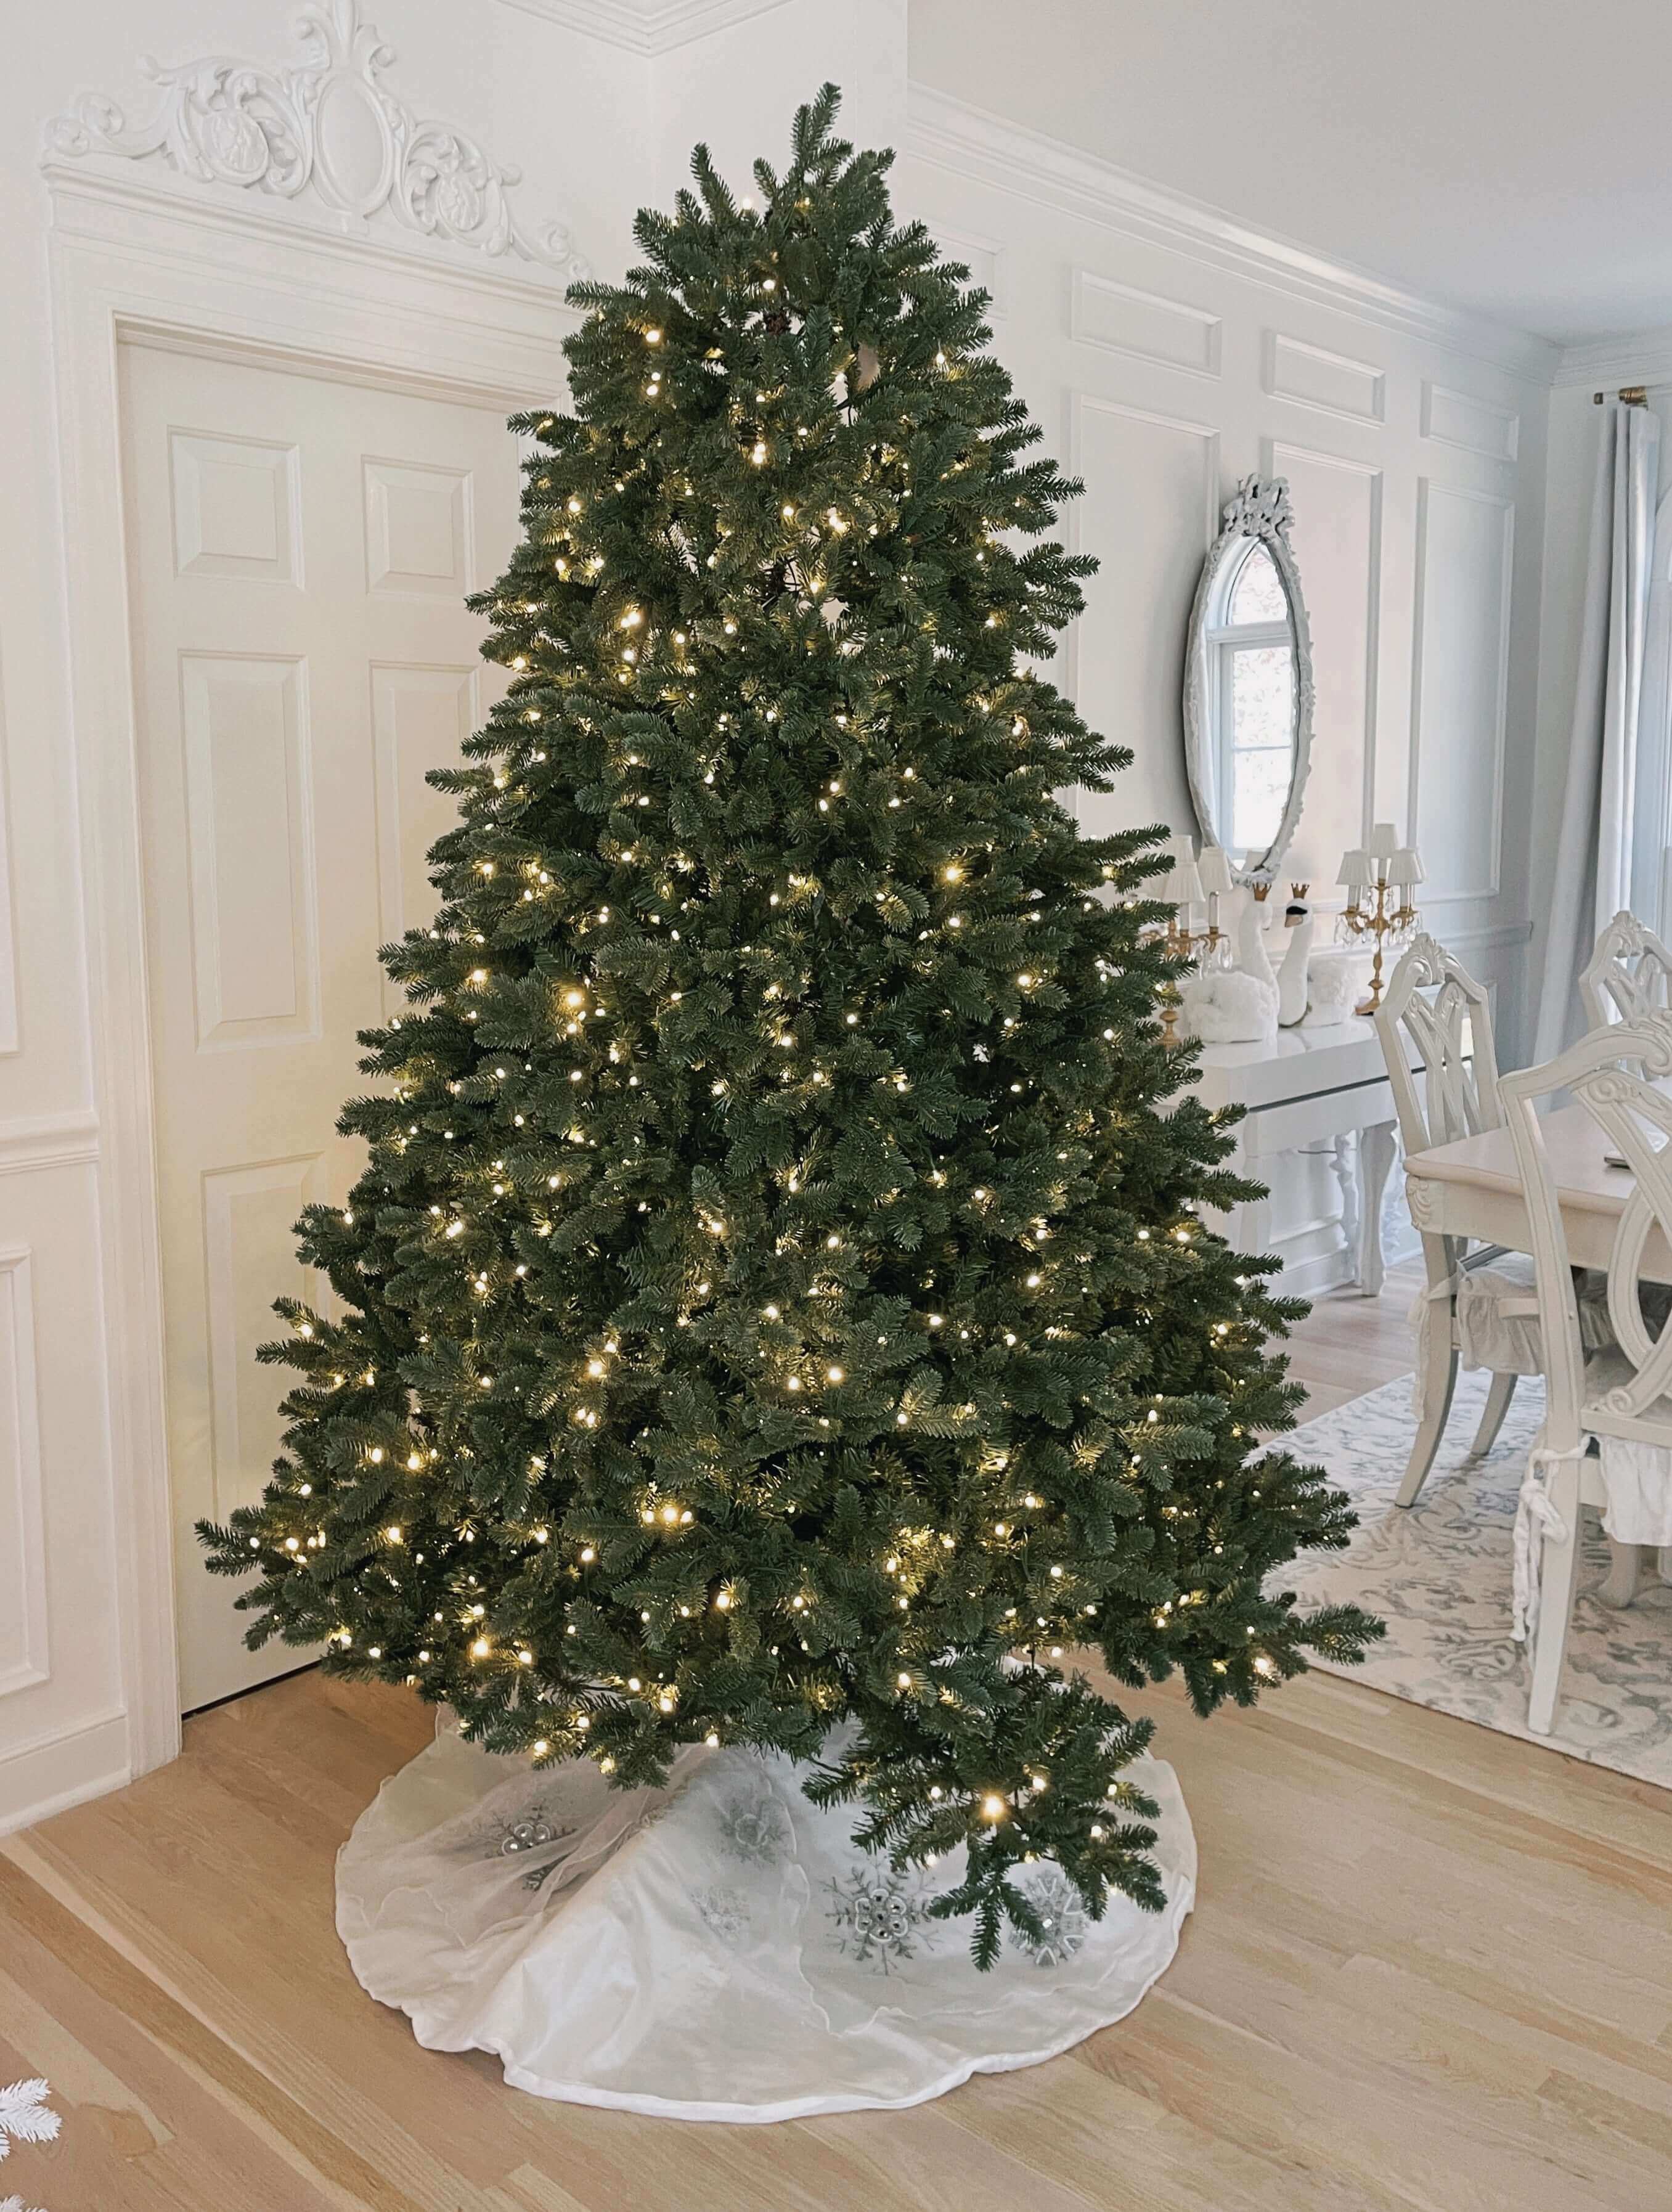 King of Christmas 7.5' Aspen Fir Quick-Shape Tree with 1400 Warm White & Multi-Color LED Lights